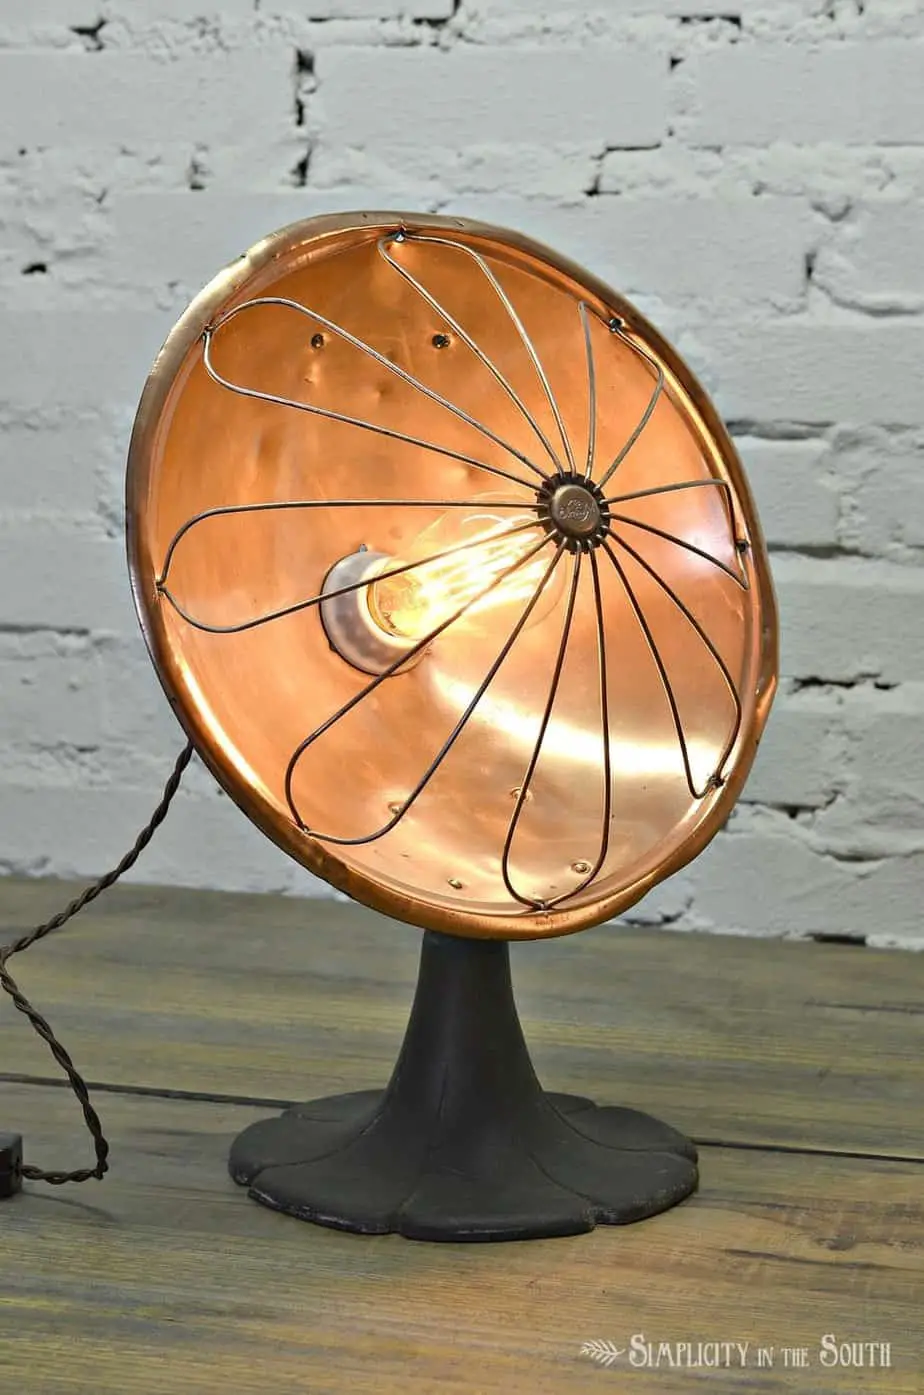 ONWAAR Medaille Vernederen How To Make a Lamp Out of an Antique Copper Desk Heater – Simplicity in the  South